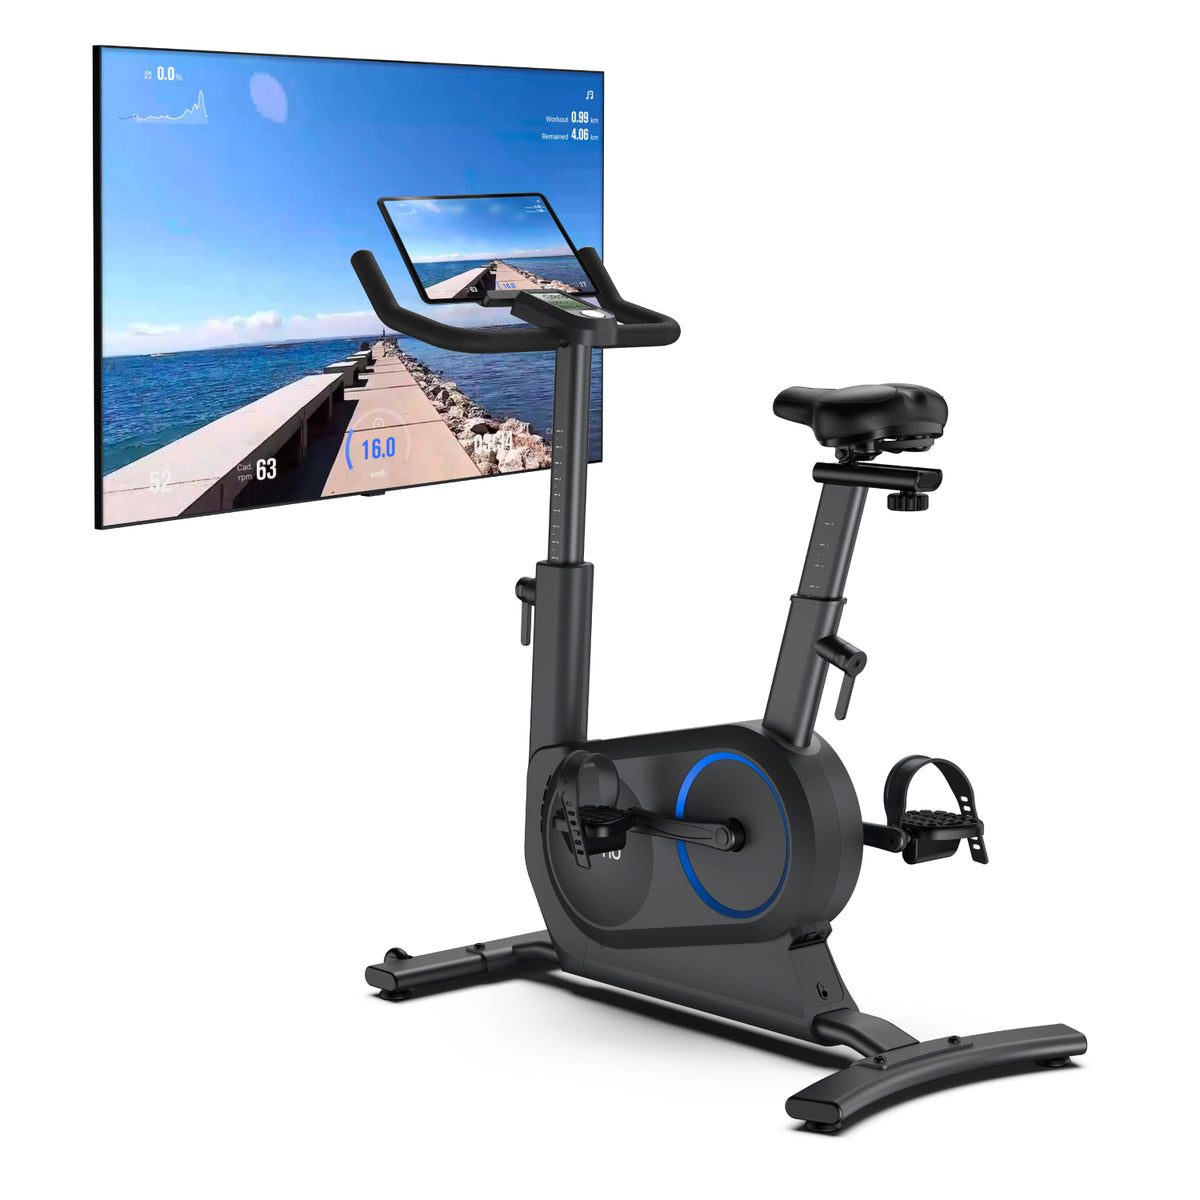 An AI Smart Bike S by Renpho EU with a large digital screen displaying a scenic ocean boardwalk route. The bike is modern with adjustable settings and foot pedals, set on a flat base, designed for optimal fitness.